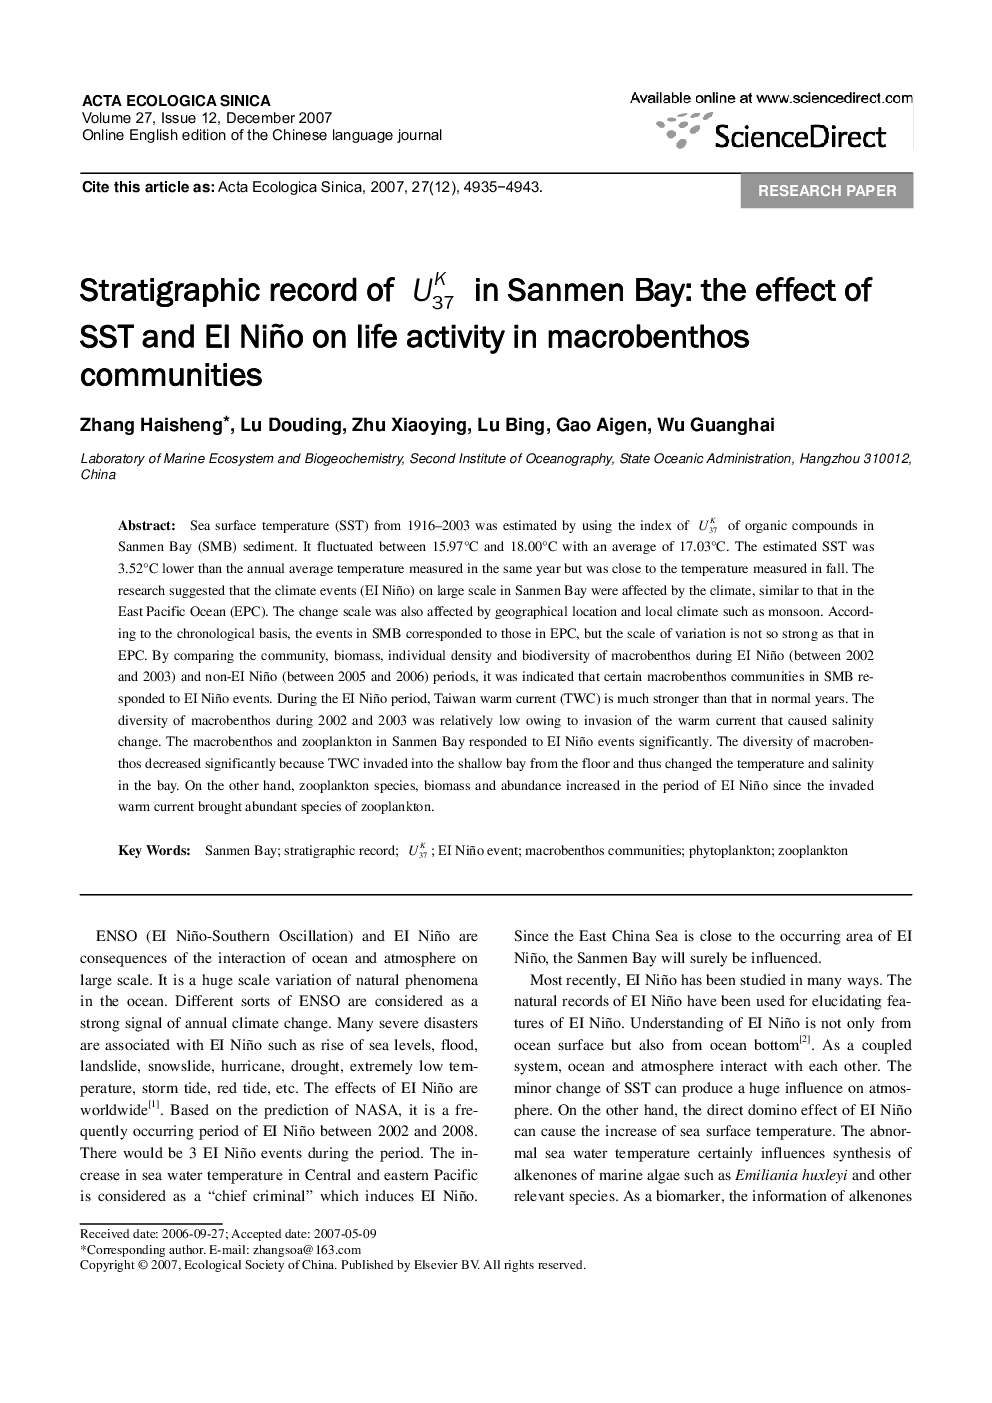 Stratigraphic record of U37K in Sanmen Bay: the effect of SST and EI Niño on life activity in macrobenthos communities